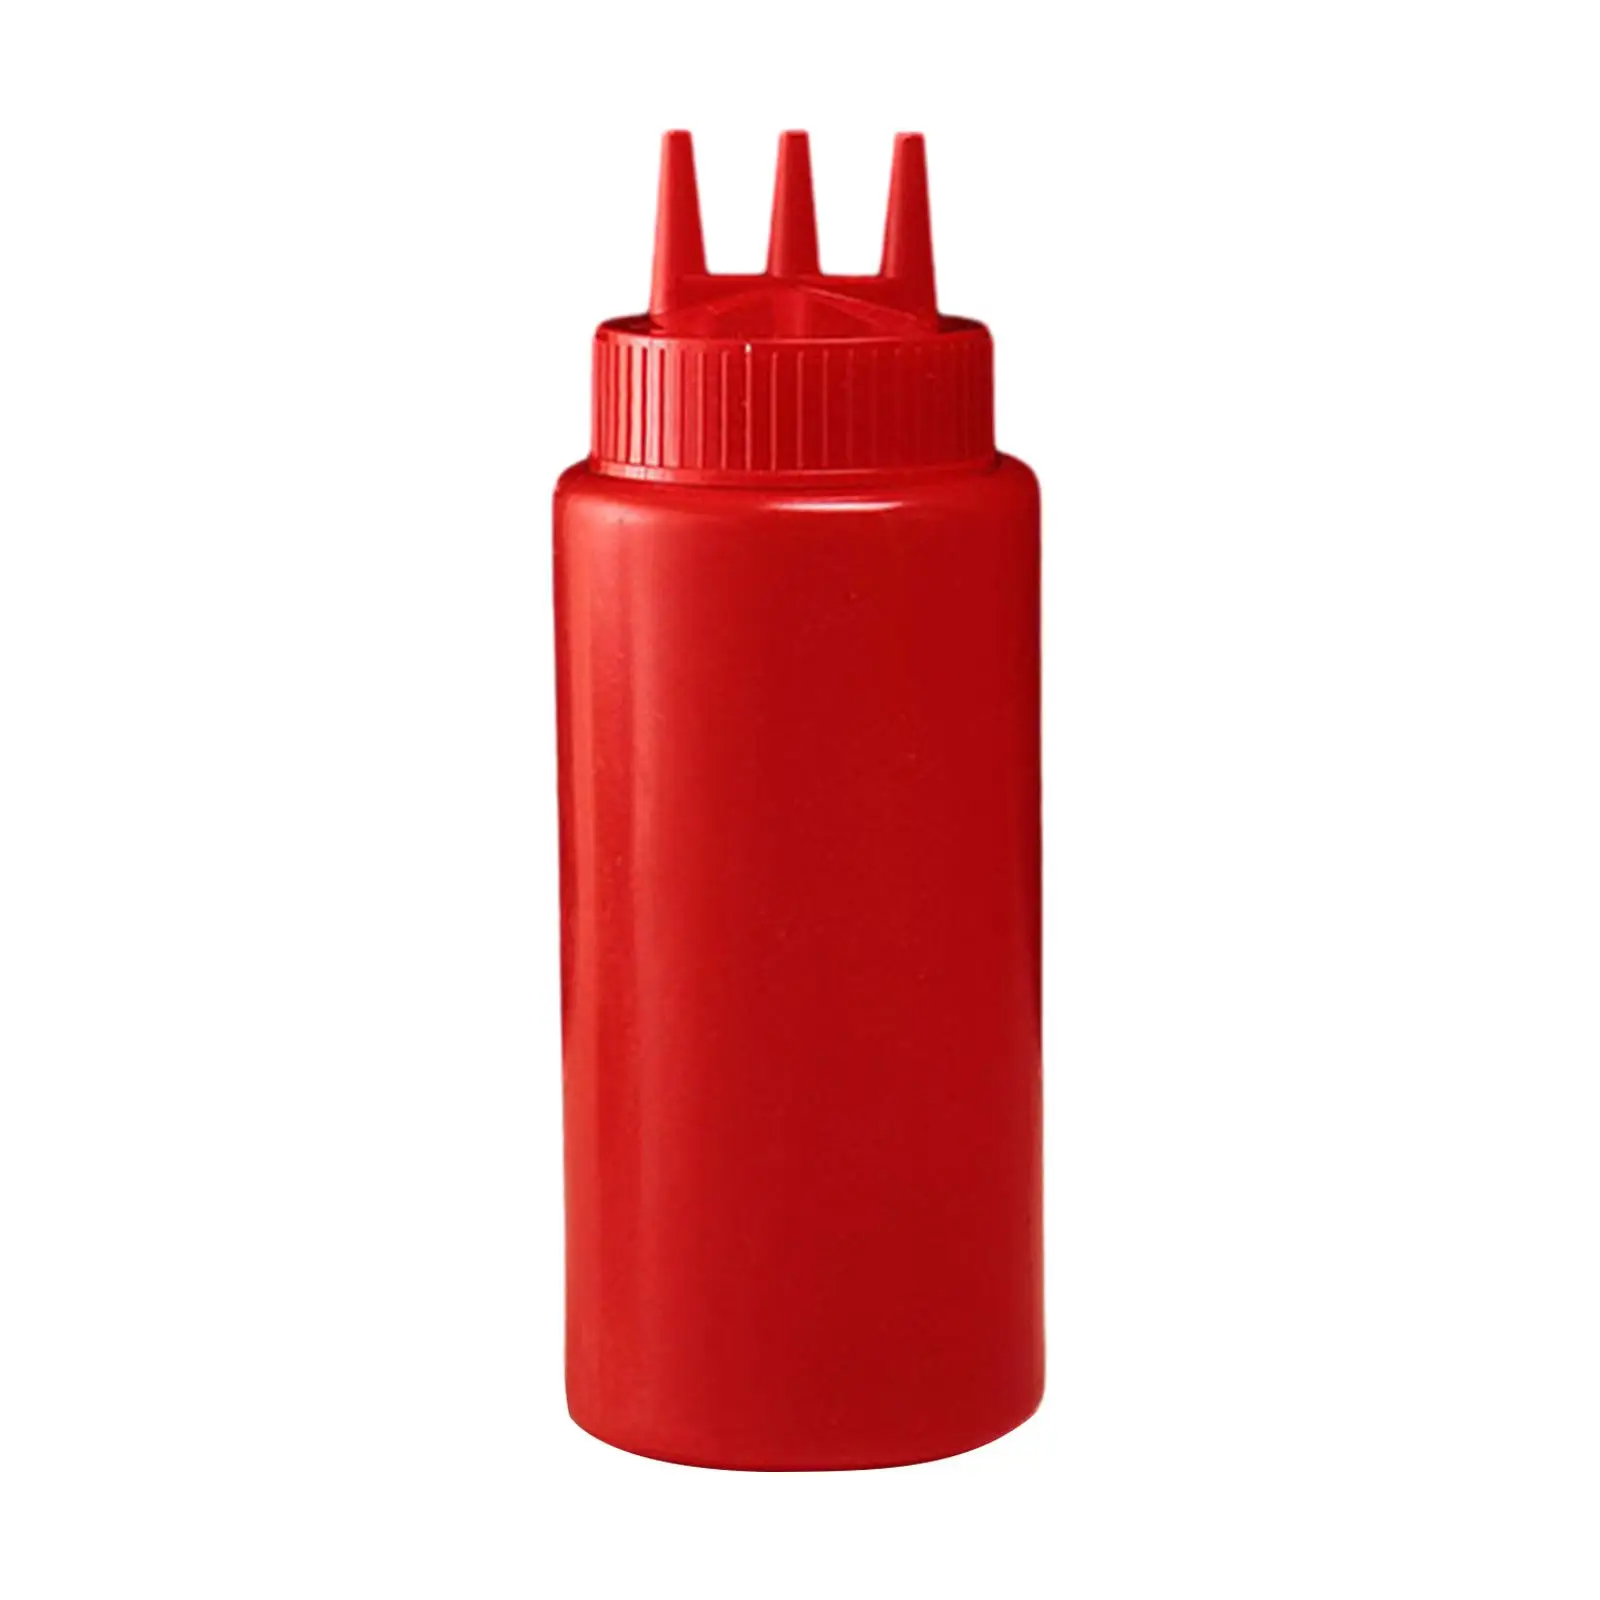 3 Hole Sauce Condiment Bottle Salad Dressing Bottle Squeezable Dispenser Bottle for Syrup Condiments Ketchup Sauces Camping